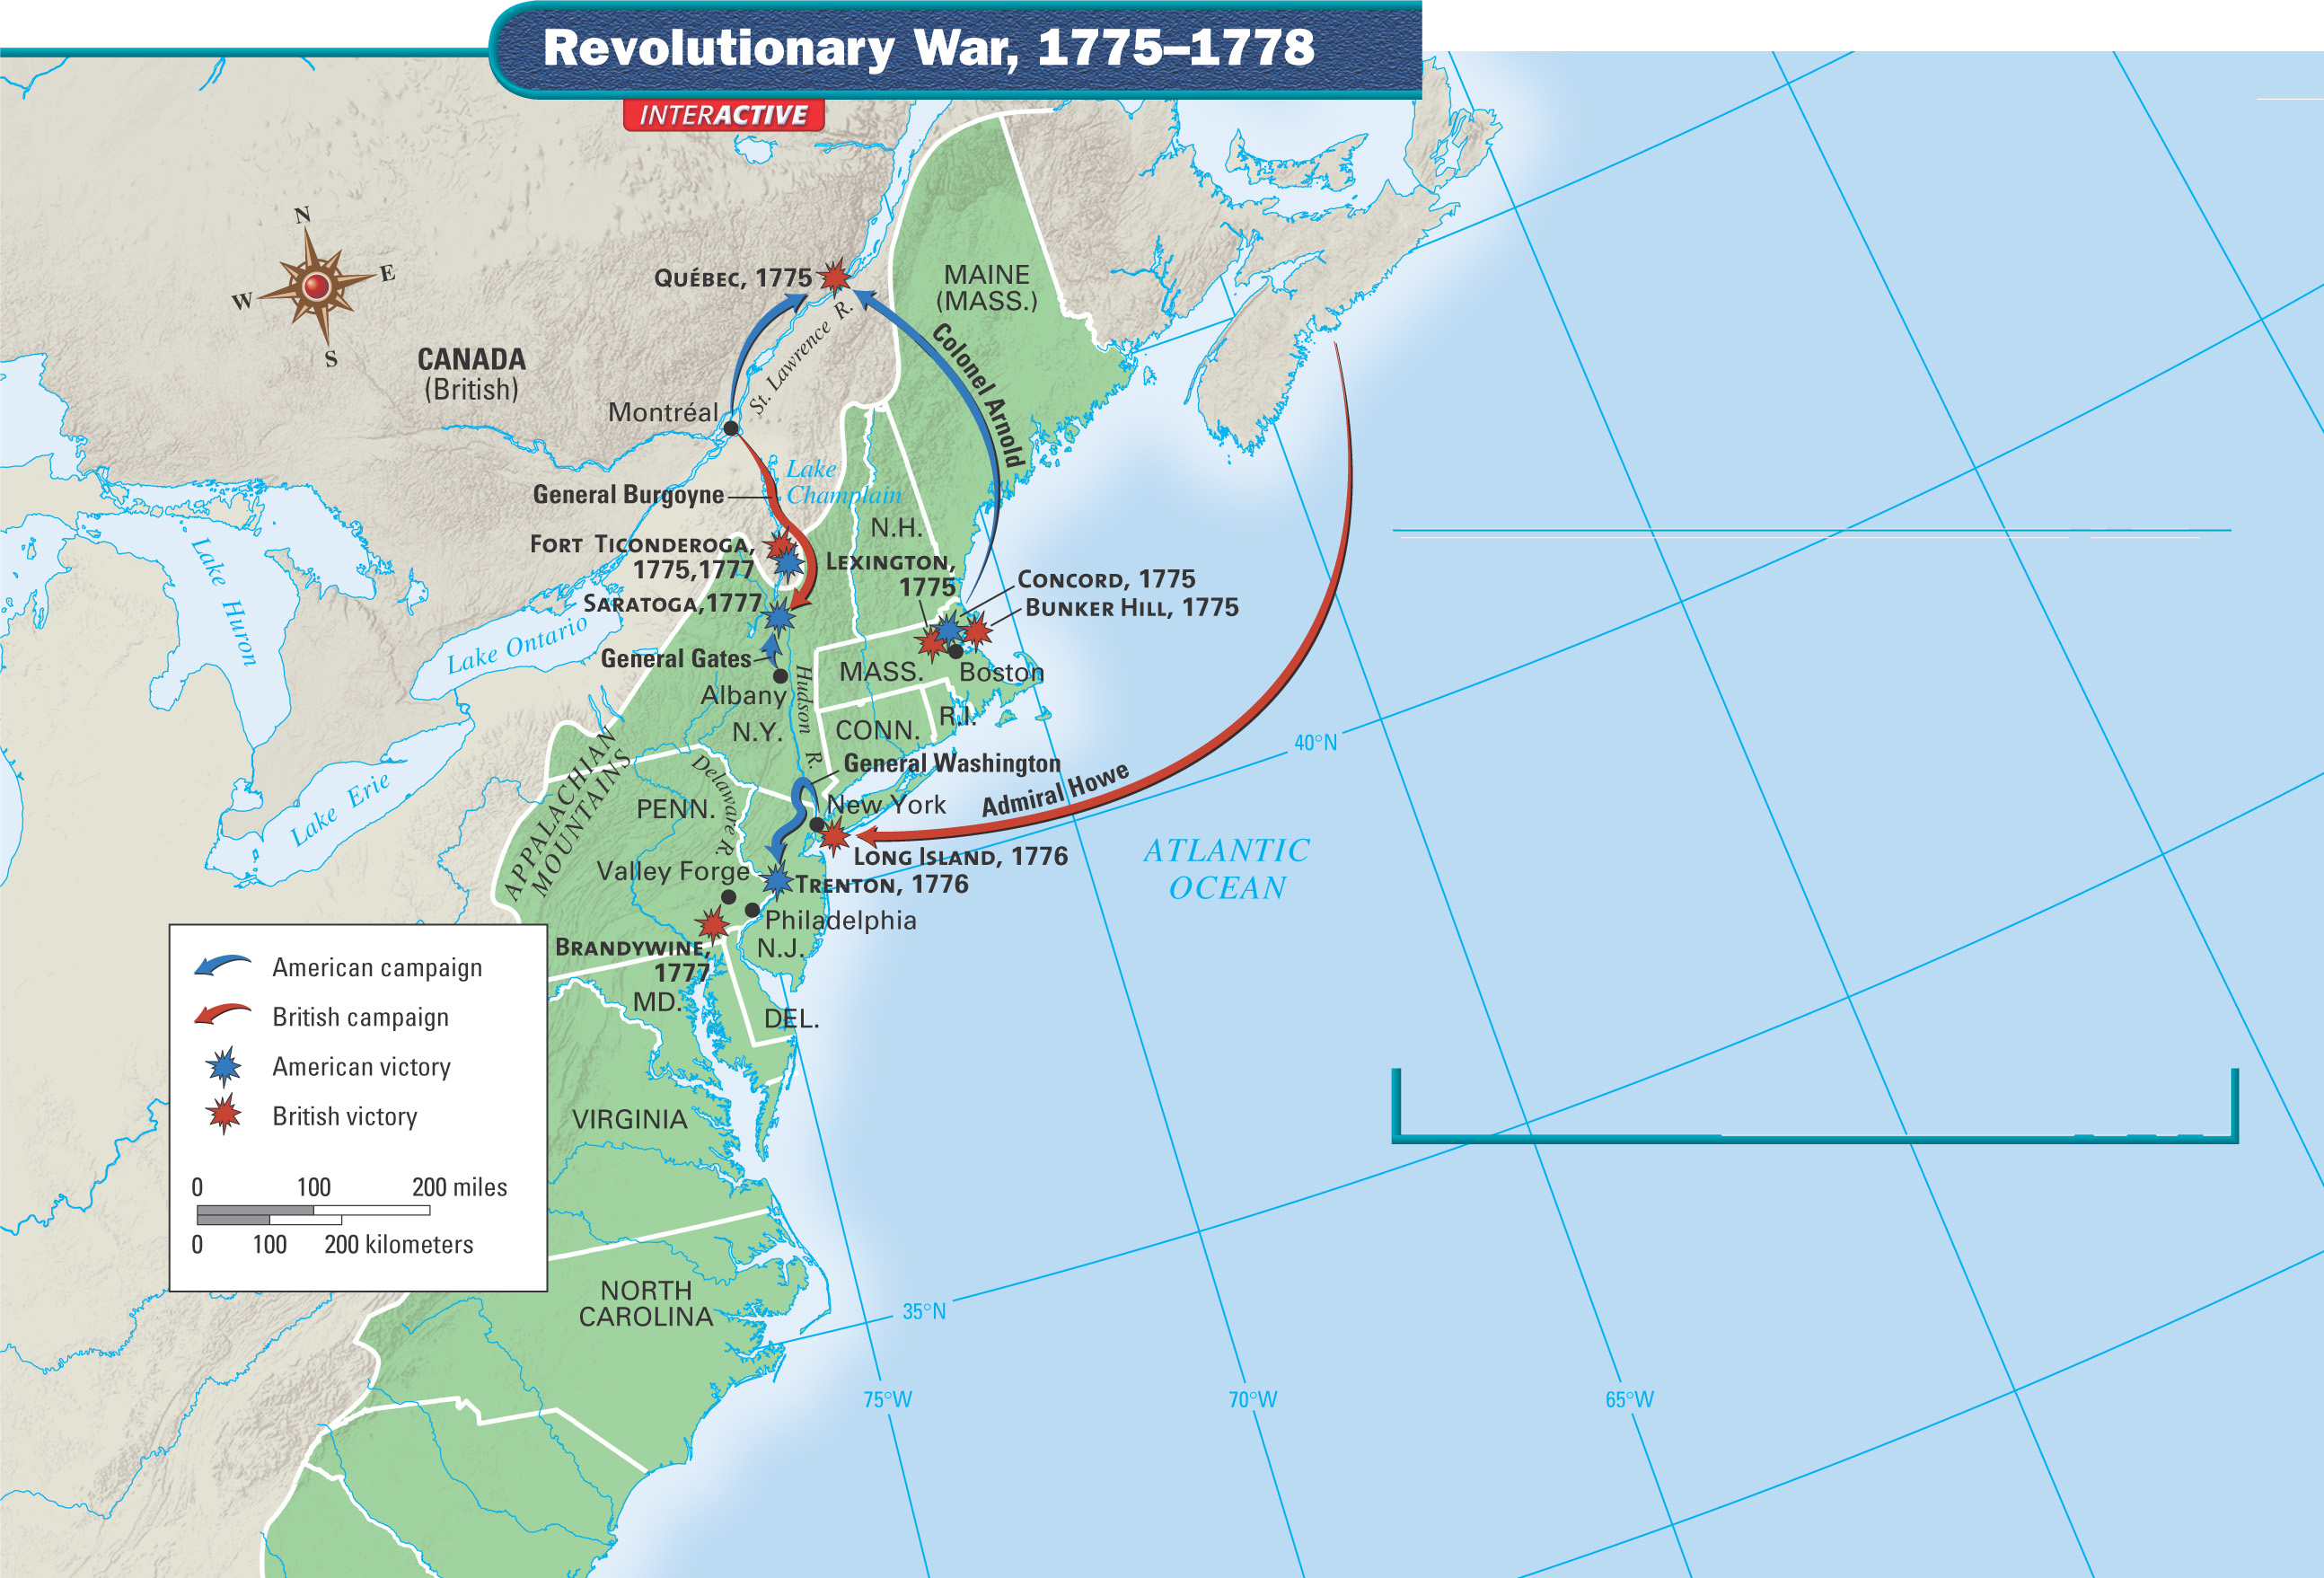 A map shows battles during the Revolutionary War 1775-1778.